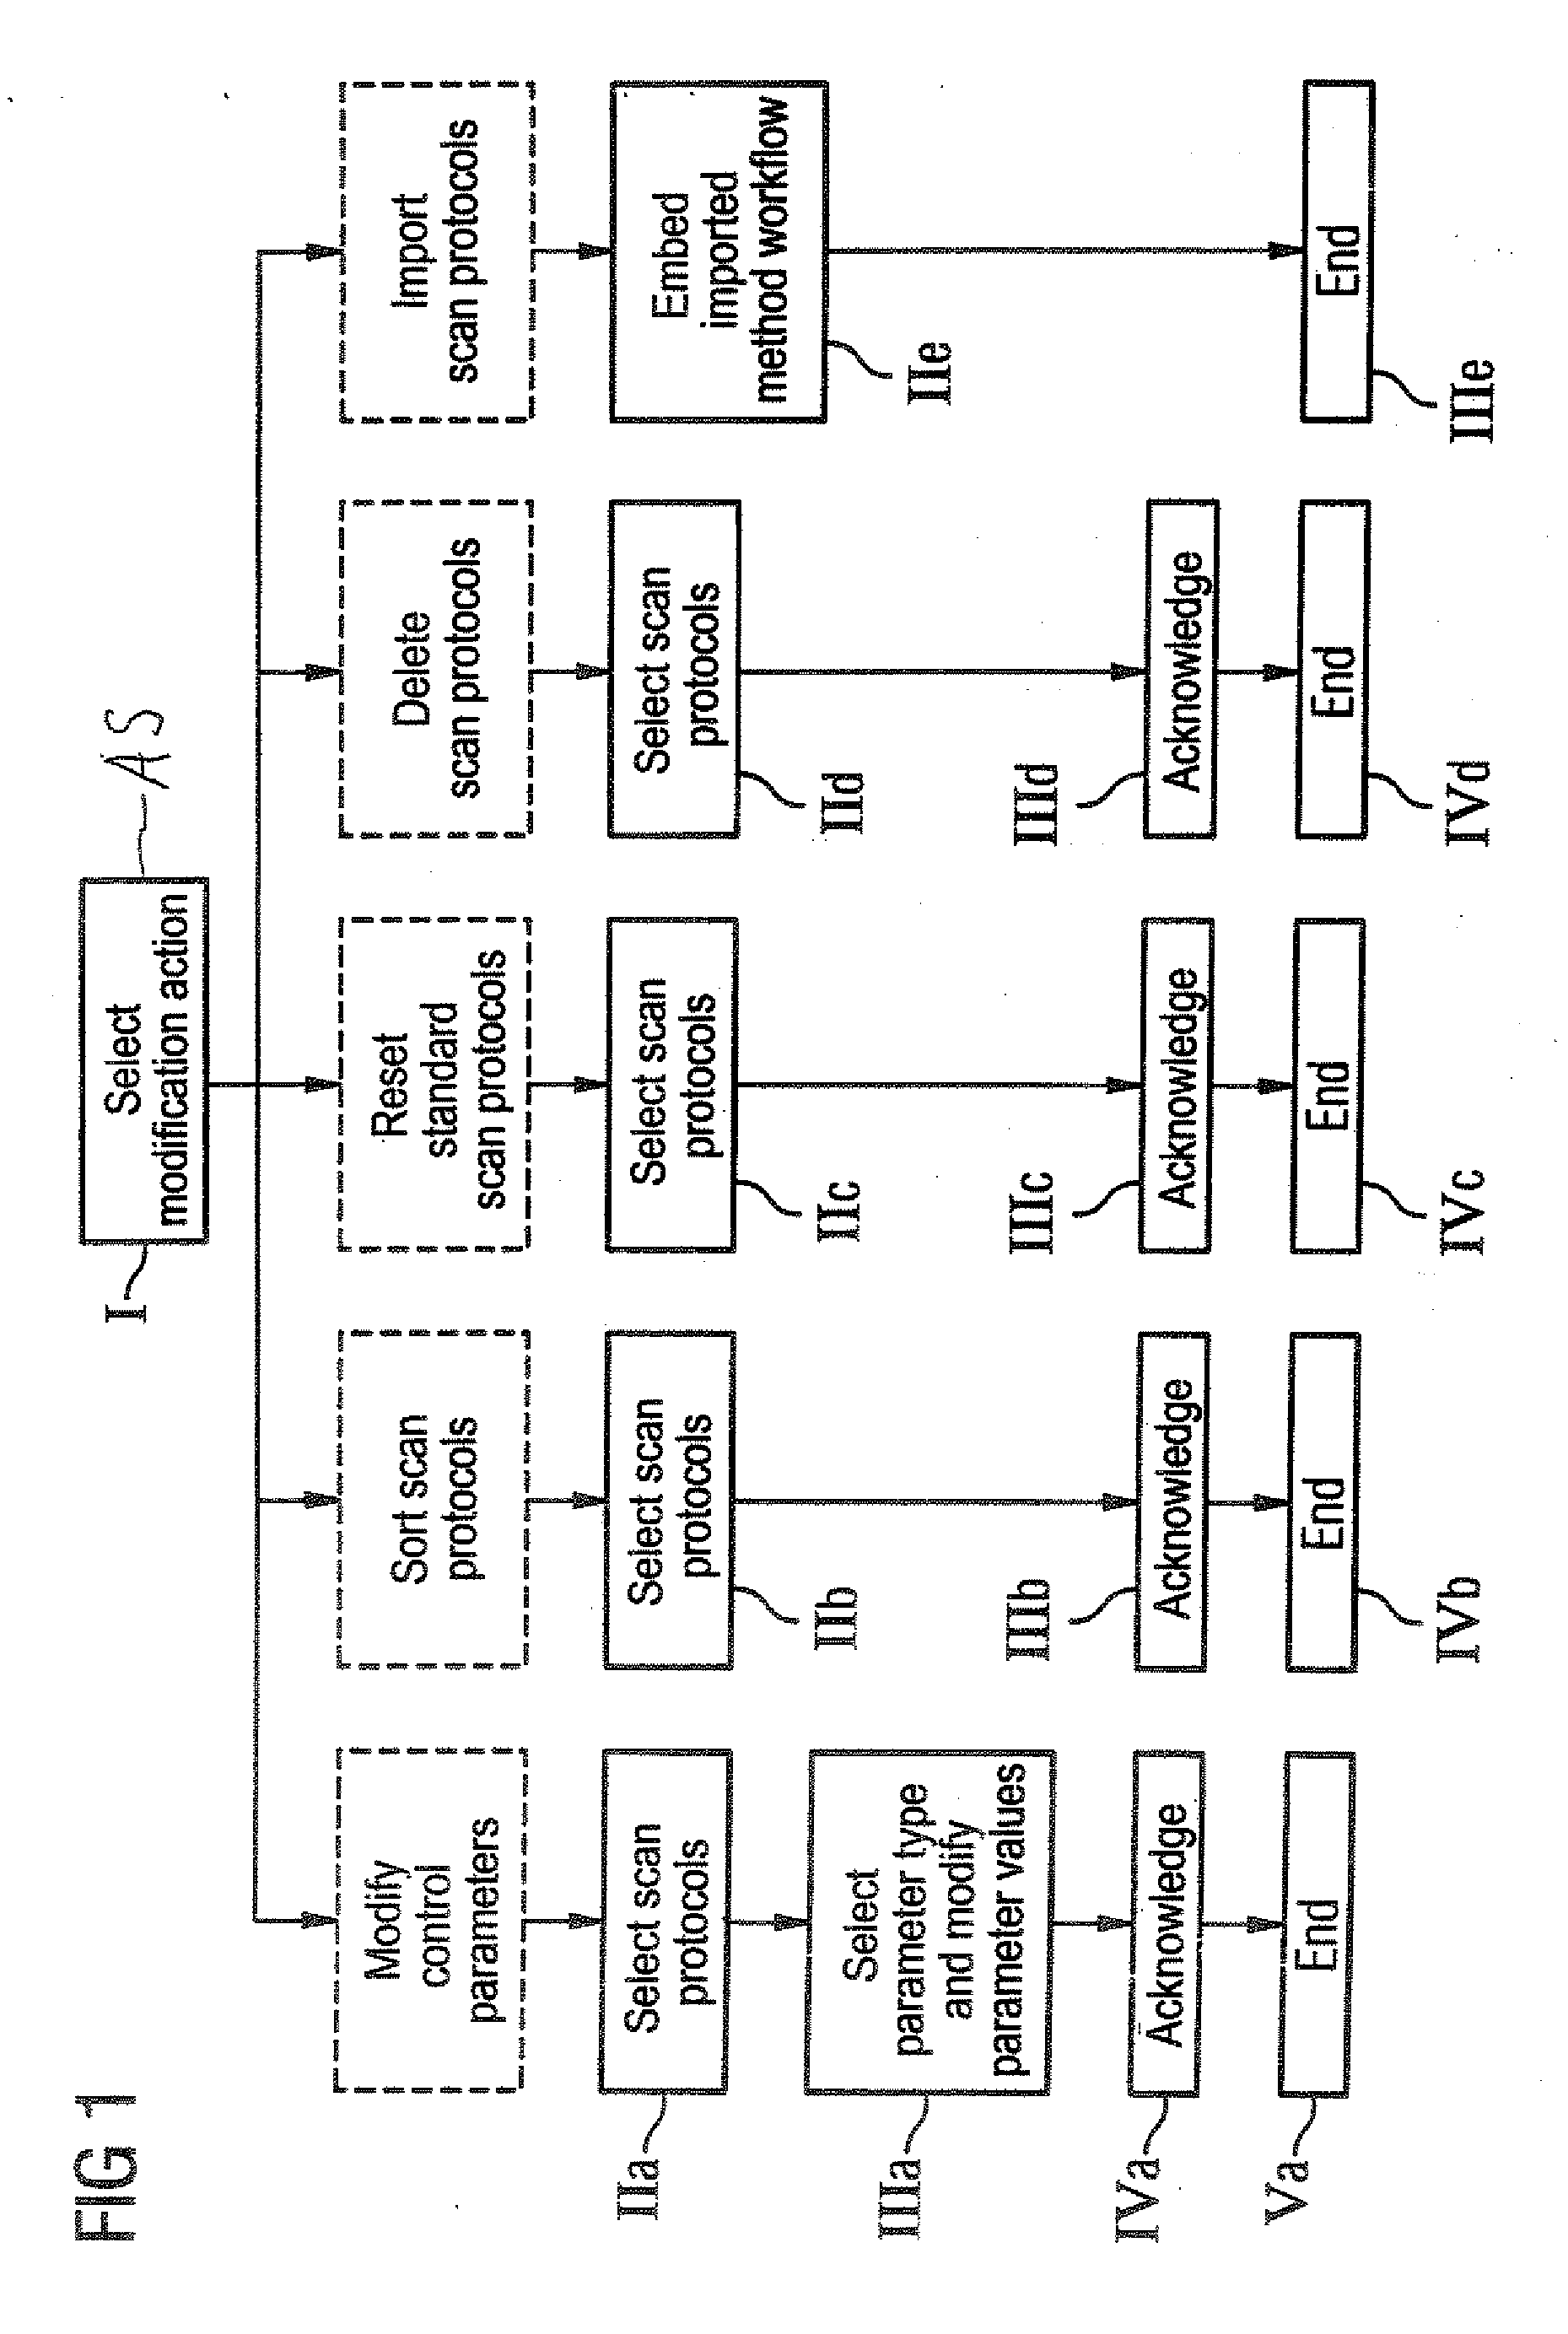 Method for modification of a number of process control protocols